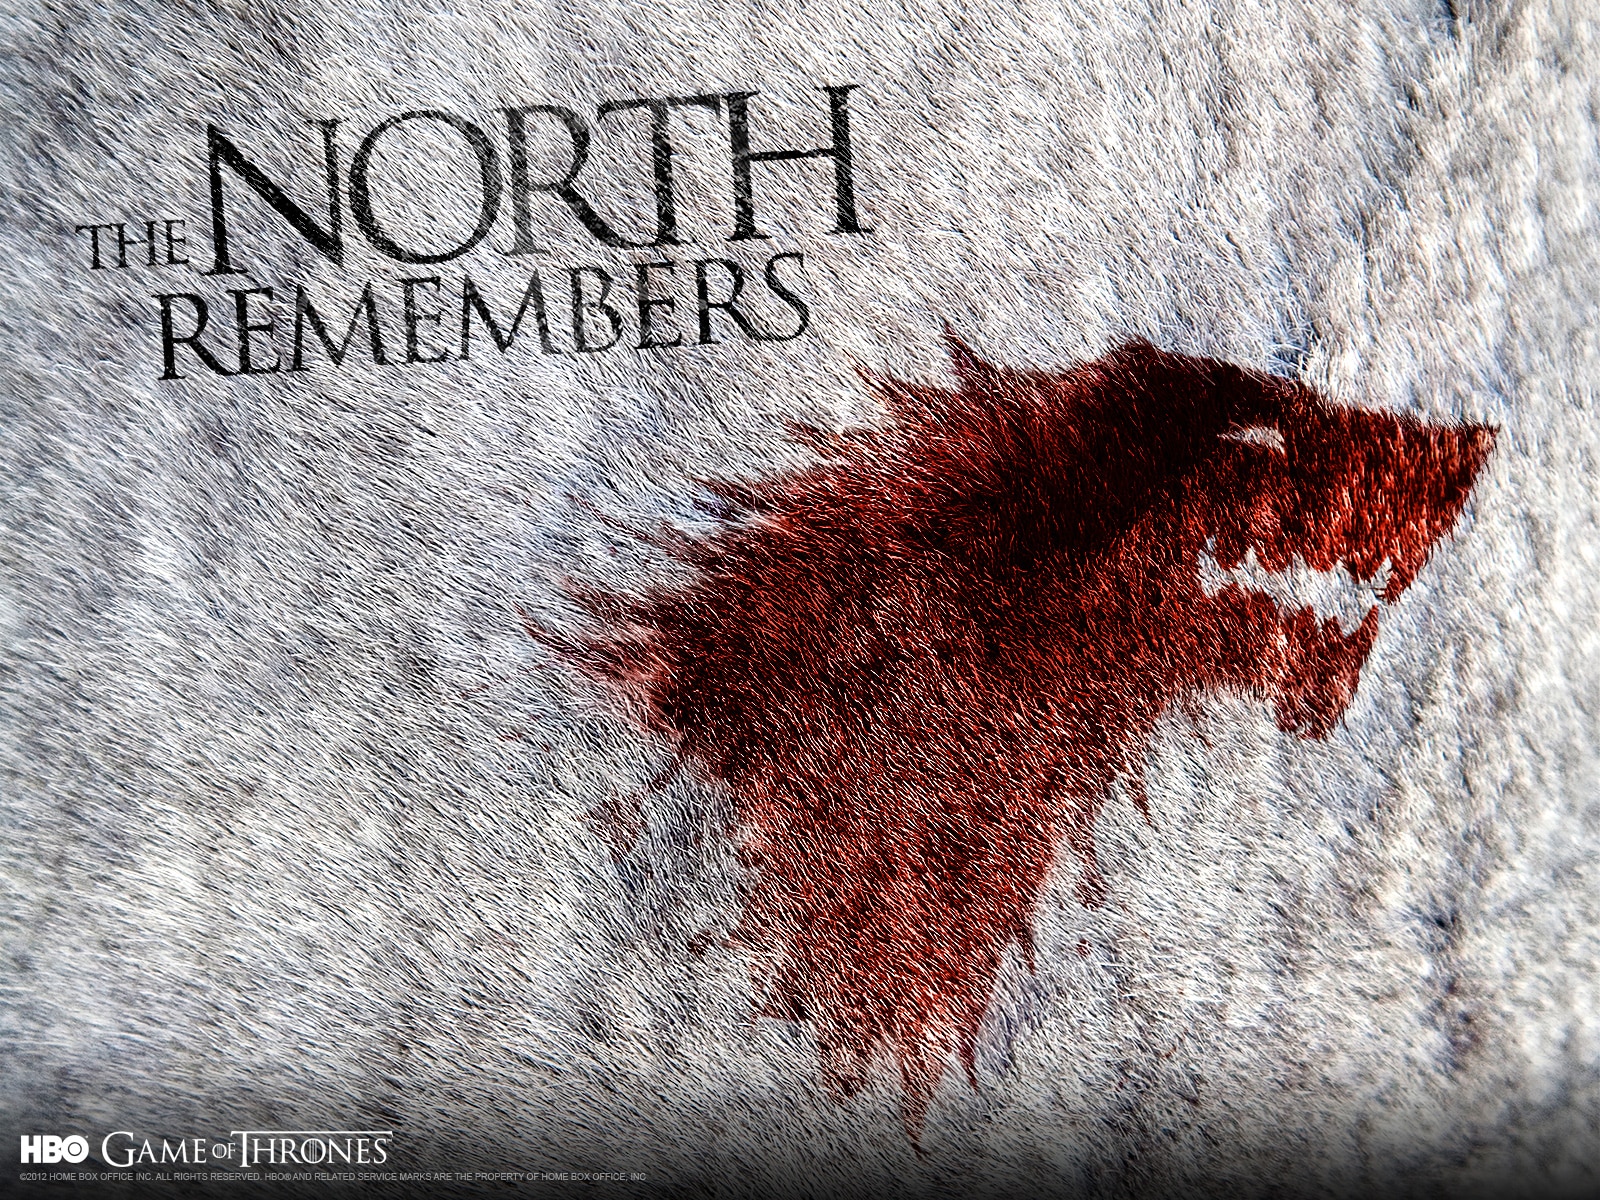 Game of Thrones Game Wallpaper (HD) - Video Games Blogger